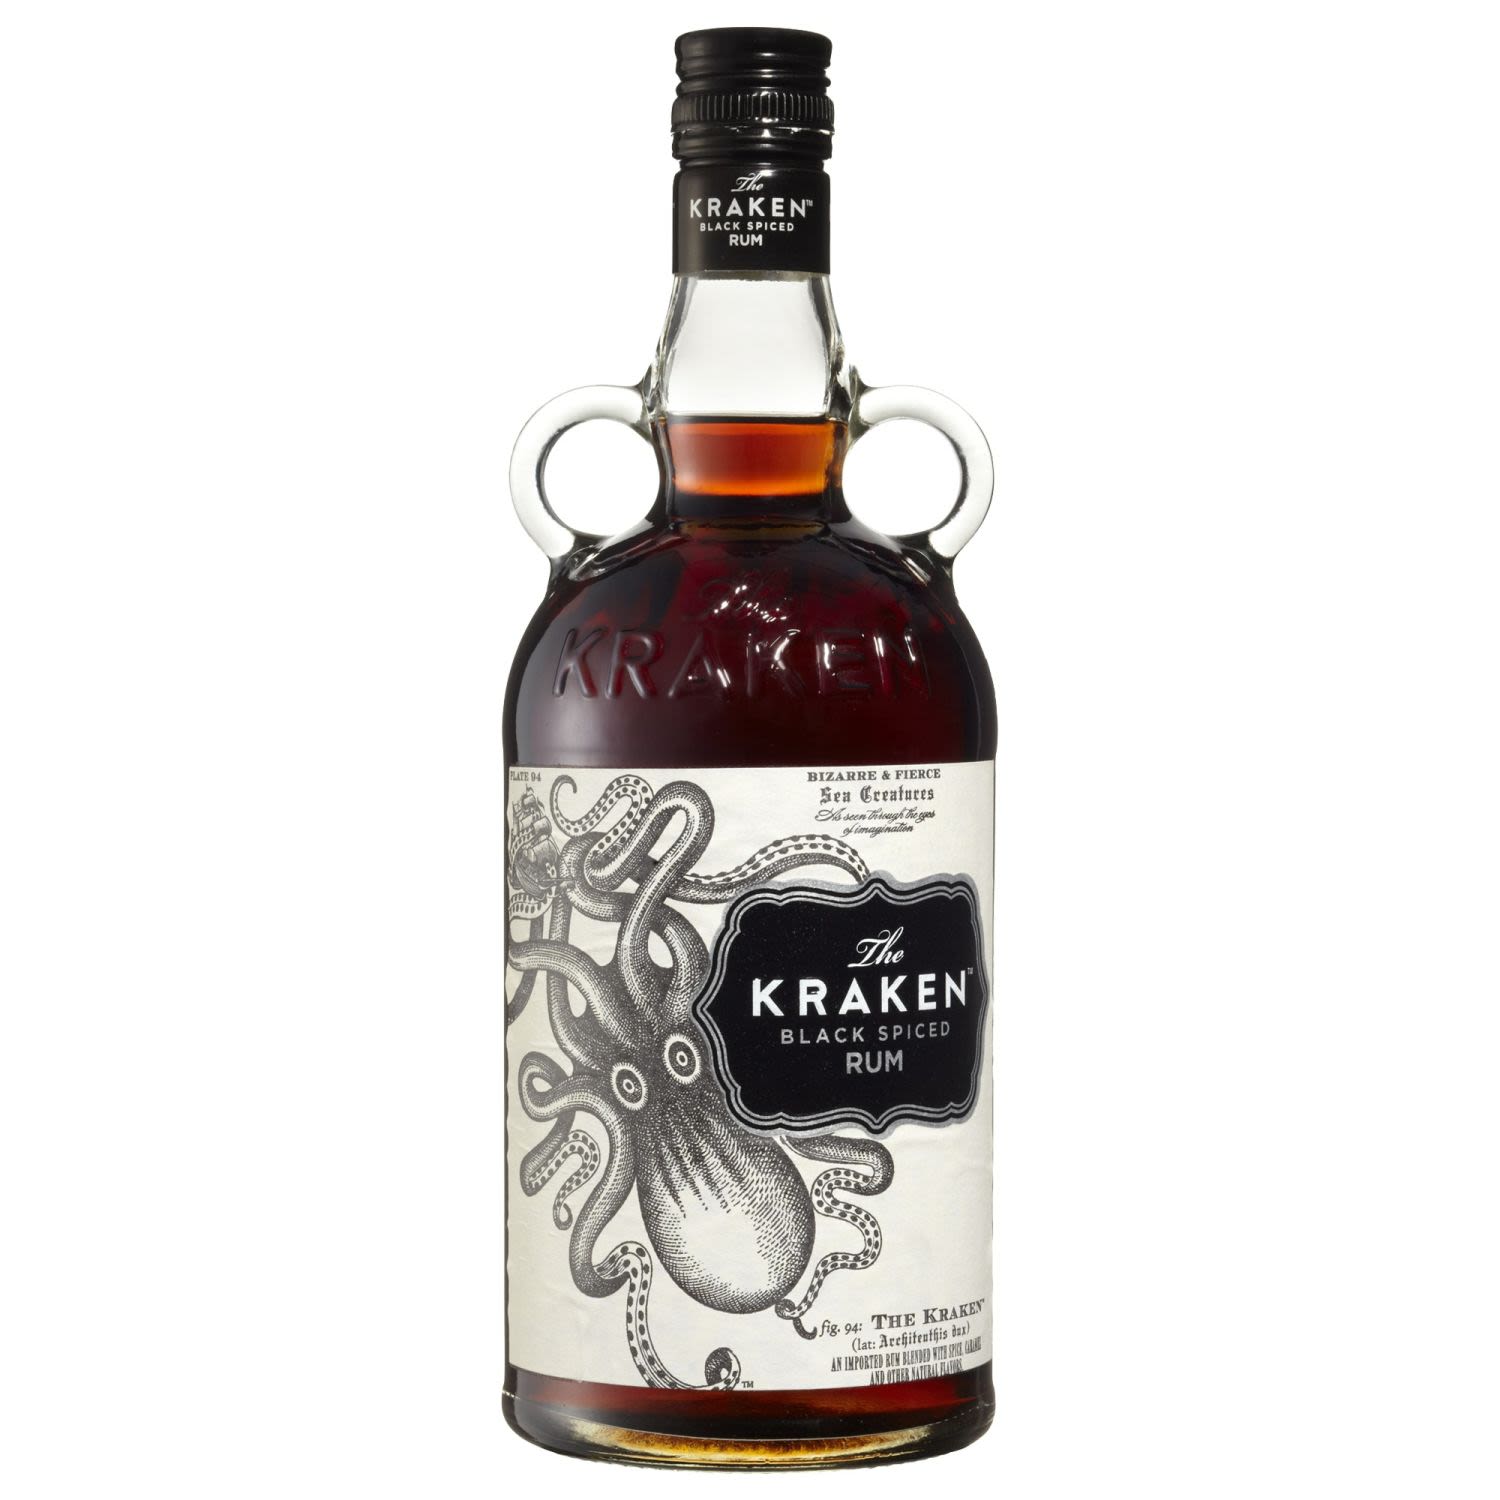 Named after a sea beast of myth and legend, The Kraken is unique Caribbean black spiced rum. Enriched with exotic spice notes of ginger, cinnamon and clove. The rich black colour takes its hue from the mysterious ink with which, as legend has it, The Kraken, a beast of epic proportions, covered its prey. While the smooth taste of the Kraken Rum lends itself to be enjoyed as sipping rum, it also tastes great as a key ingredient in a number of rum based cocktails, such as a traditional Kraken & Cola.<br /> <br />Alcohol Volume: 40.00%<br /><br />Pack Format: Bottle<br /><br />Standard Drinks: 22</br /><br />Pack Type: Bottle<br /><br />Country of Origin: USA<br />